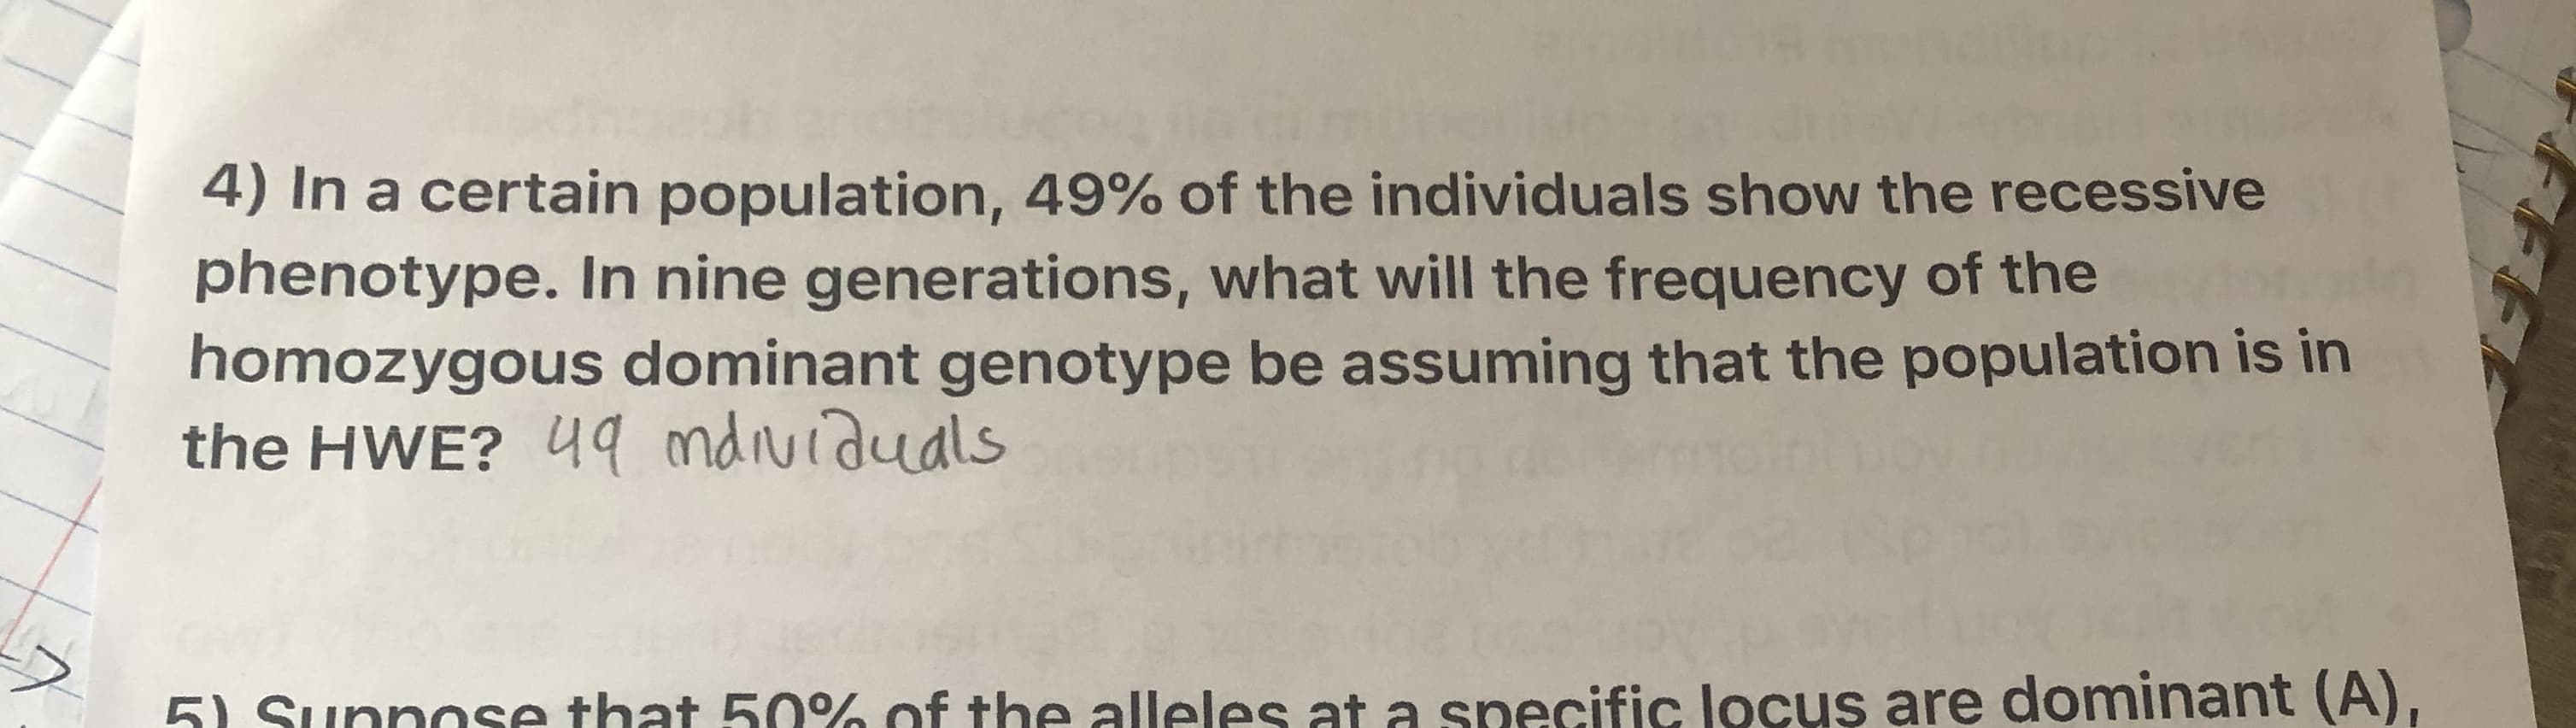 4) In a certain population, 49% of the individuals show the recessive
phenotype. In nine generations, what will the frequency of the
homozygous dominant genotype be assuming that the population is in
the HWE? 49 ndividuals
